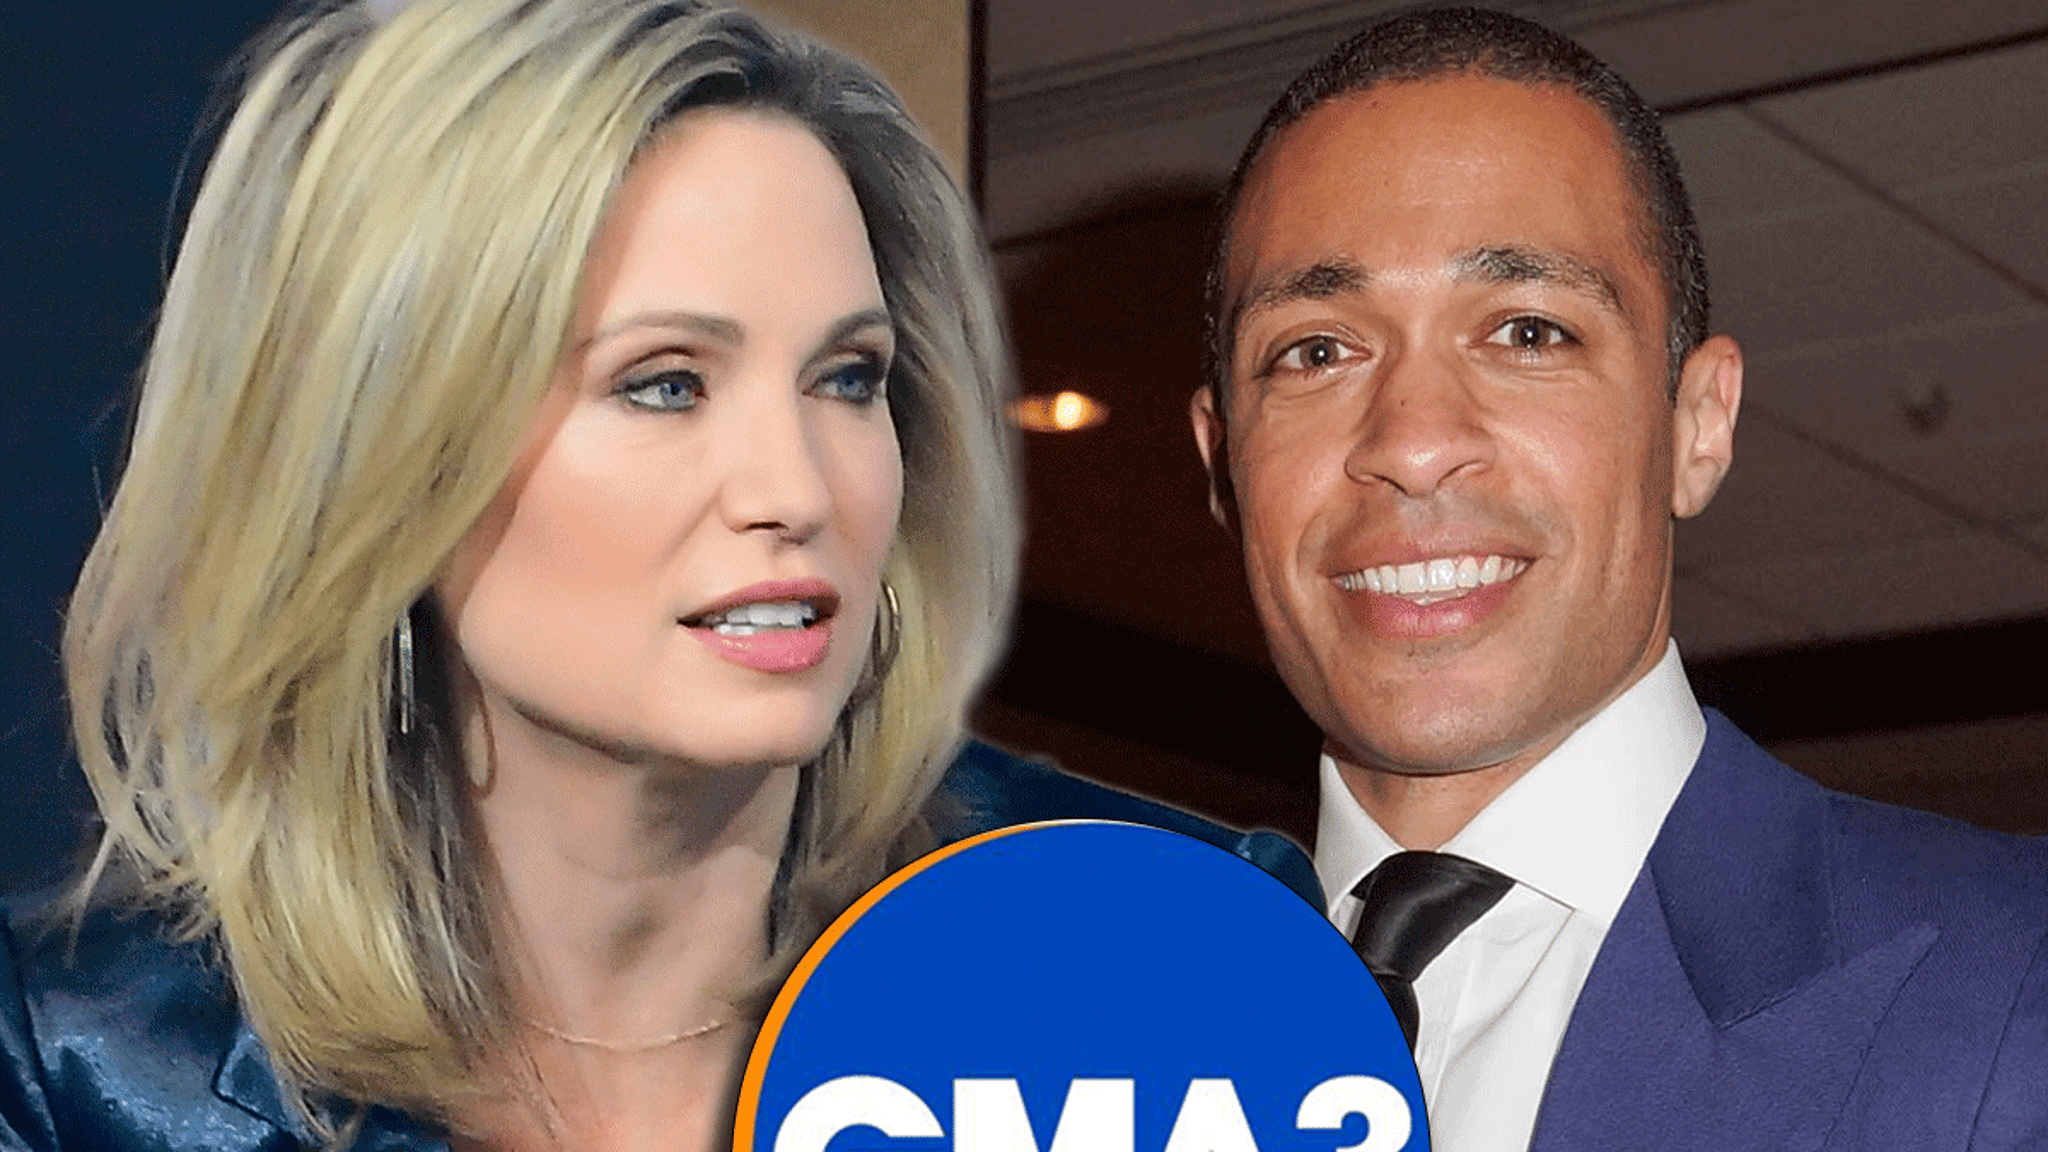 'GMA3' Ratings Jump After News of Amy Robach & T.J. Holmes Relationship